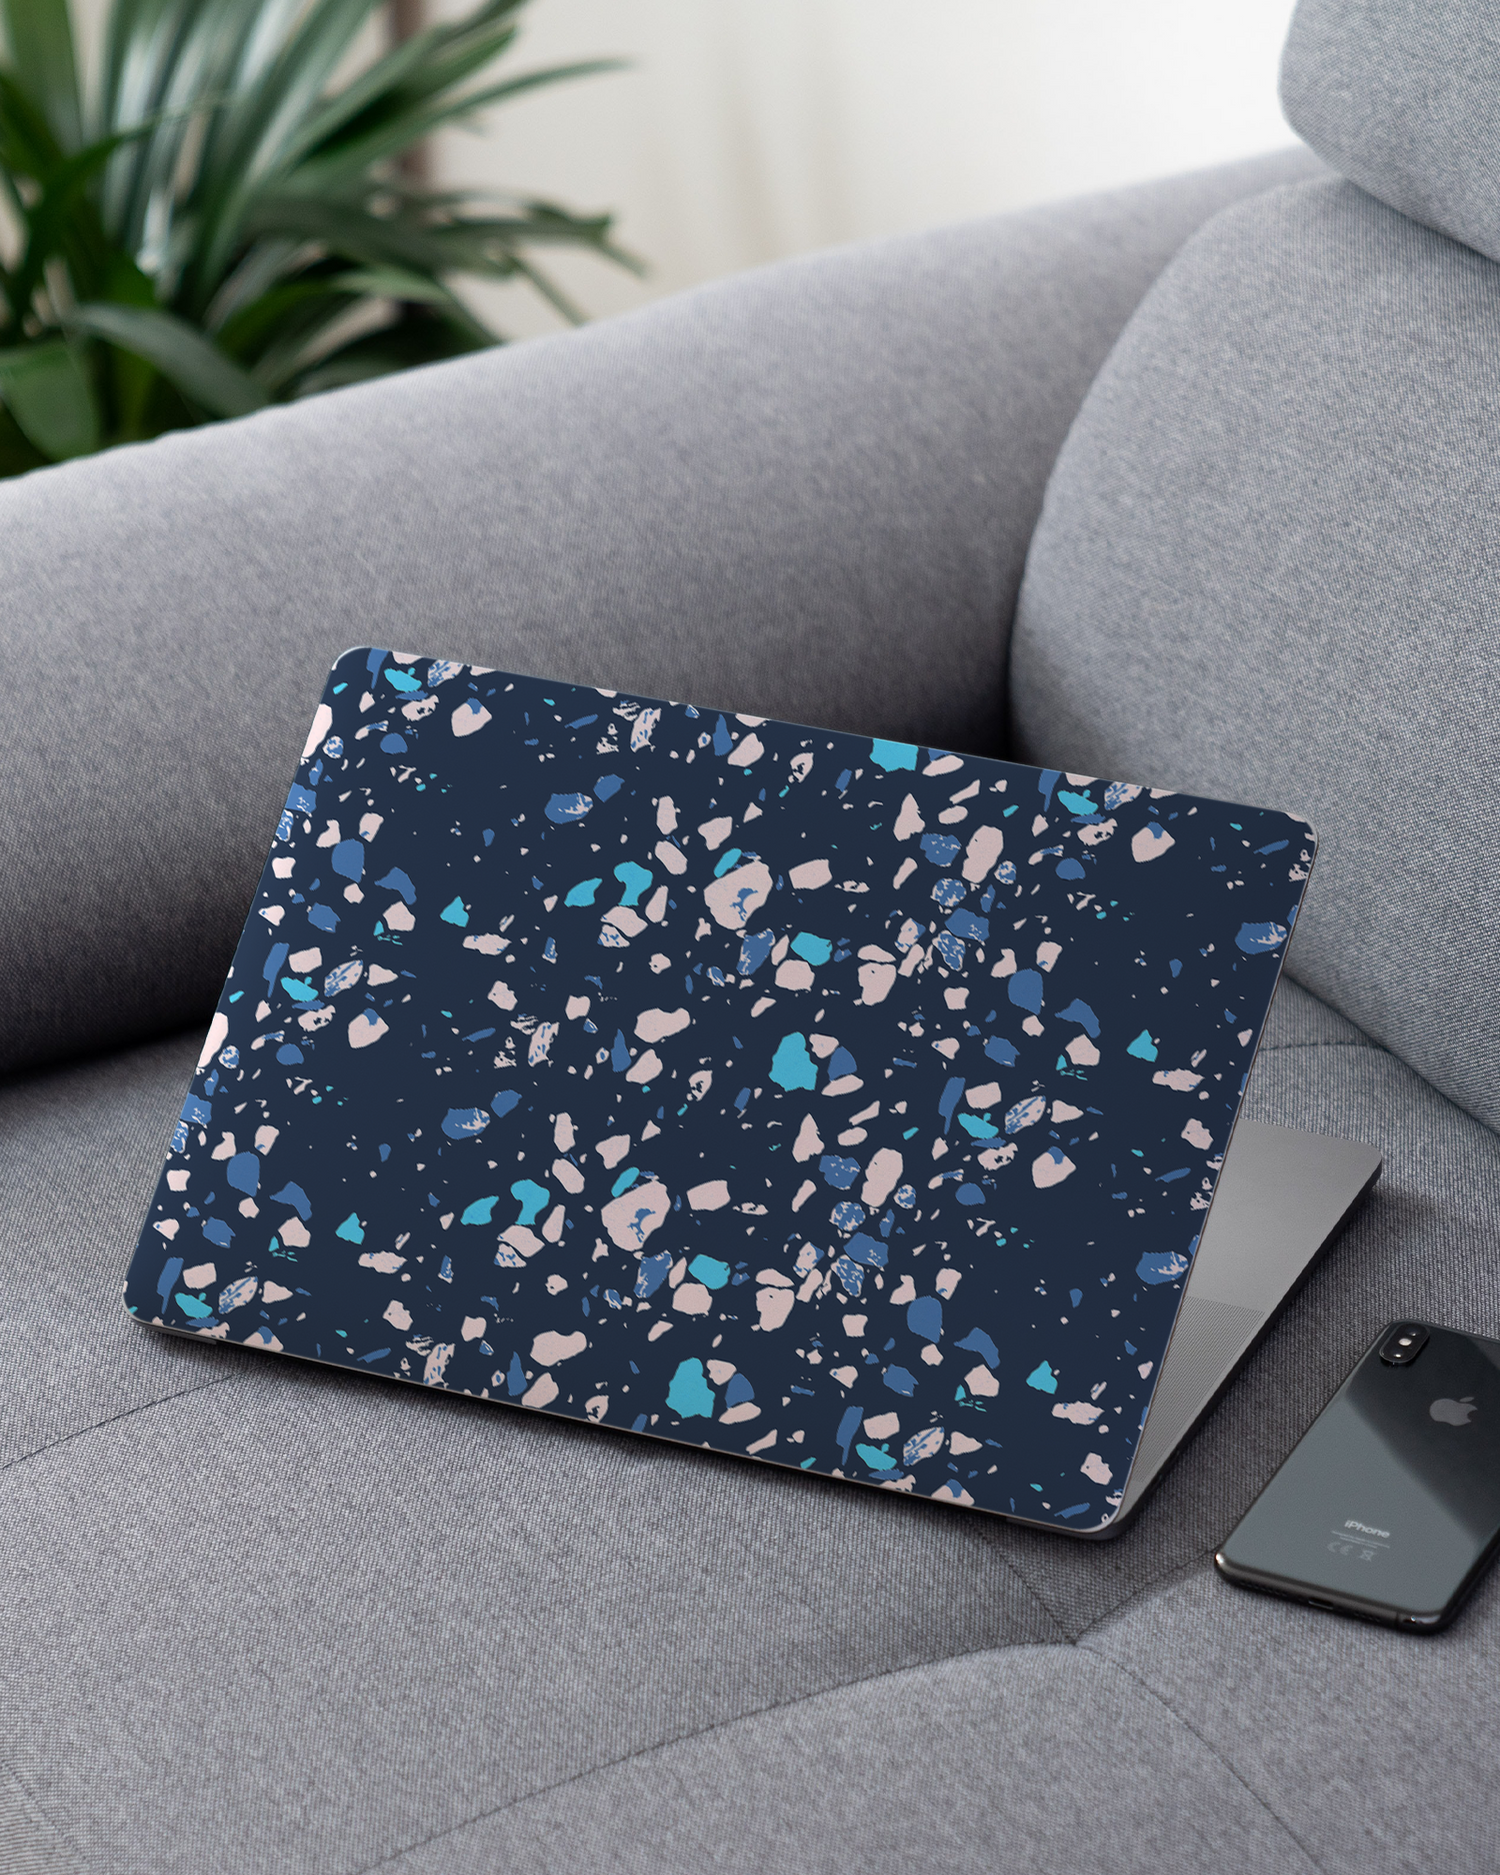 Speckled Marble Laptop Skin for 13 inch Apple MacBooks on a couch